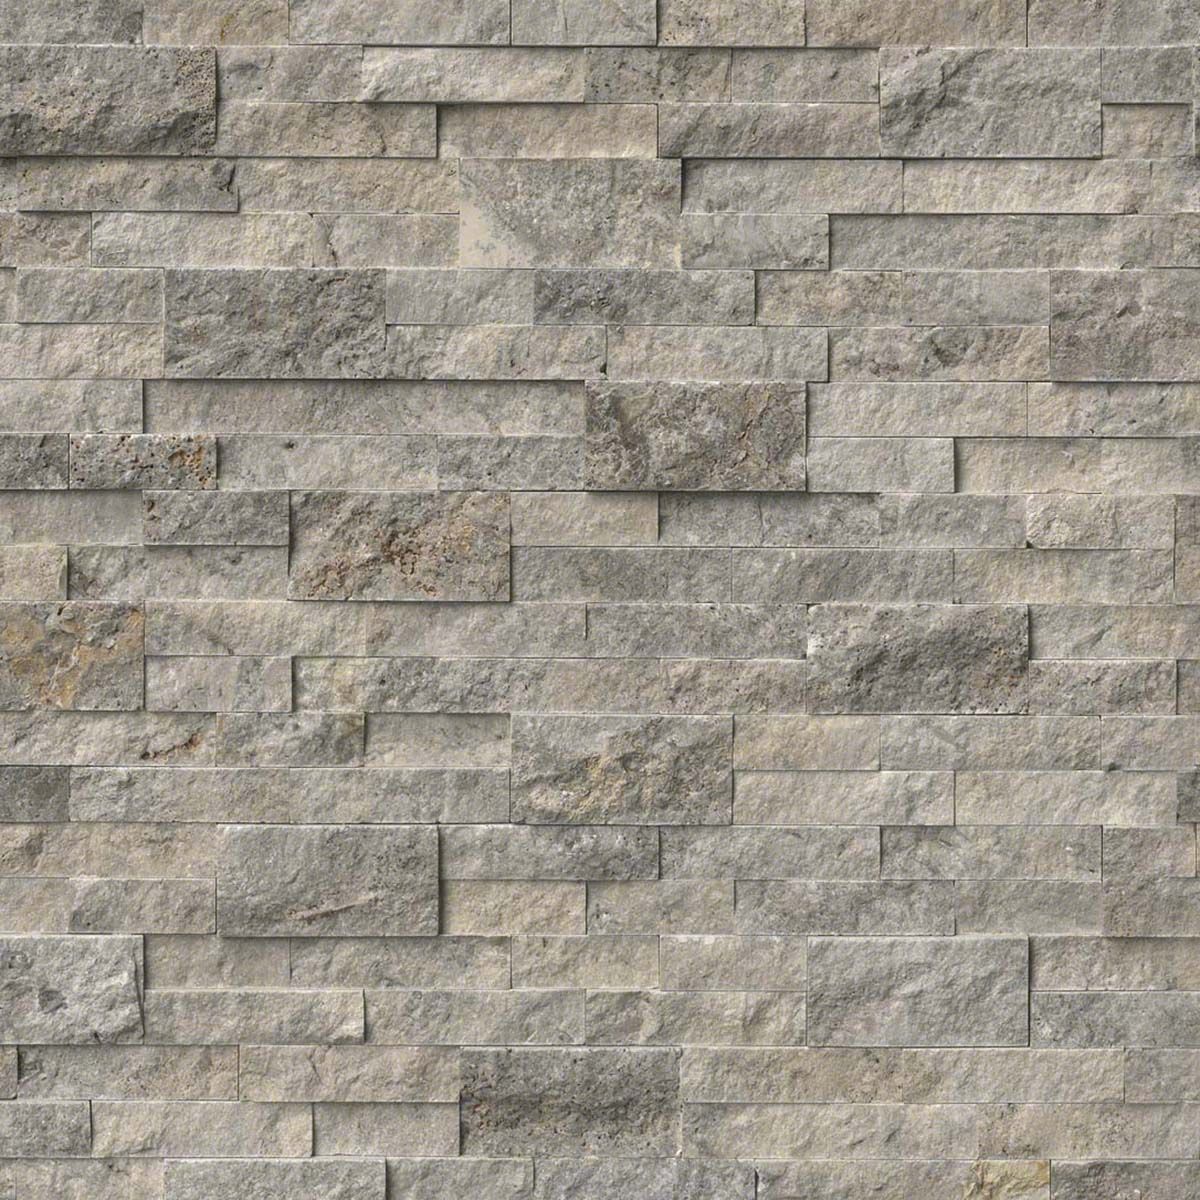 Grey Stone Fireplace Awesome From Msi Stone Have Sample Primarily Gray with some Beige